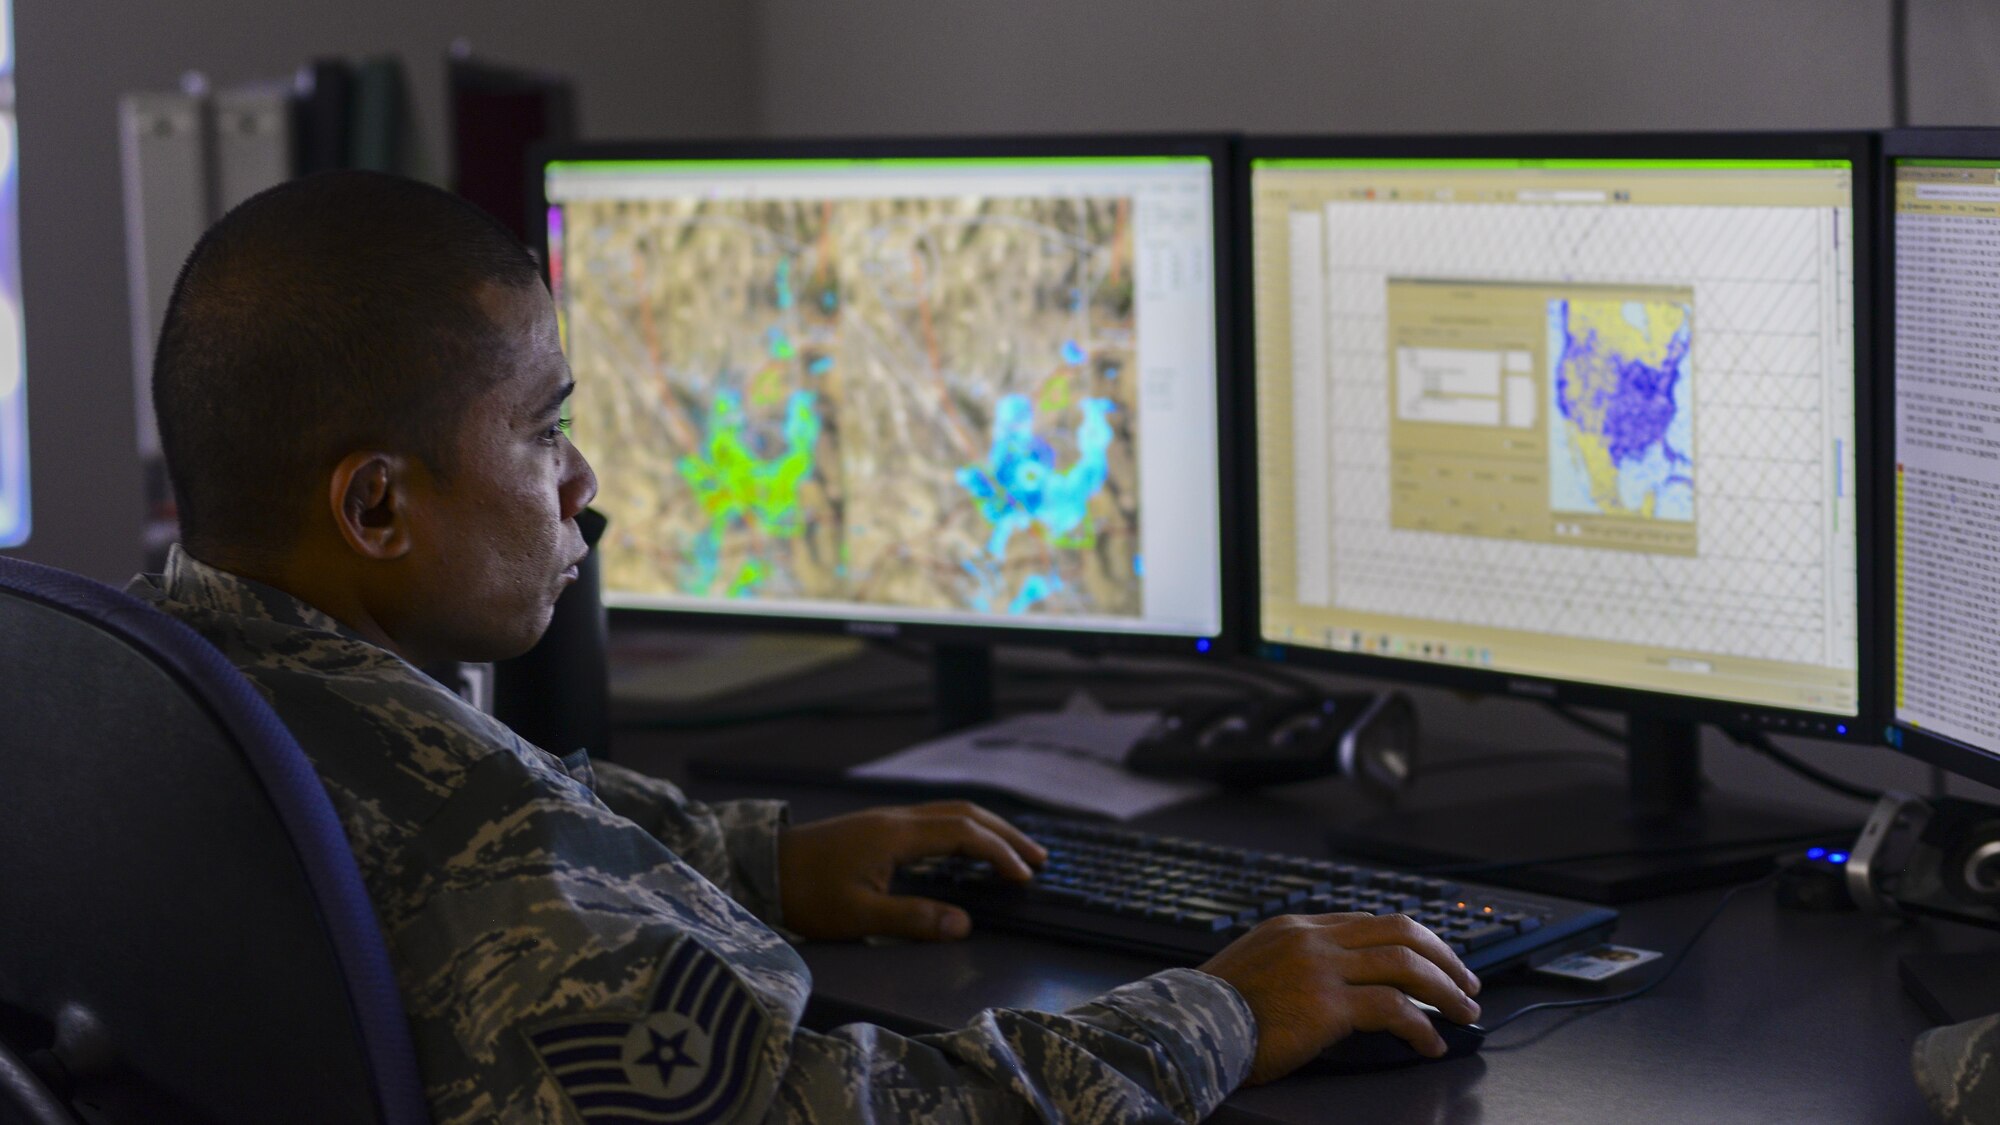 U.S. Air Force Tech. Sgt. Ryan Mendiola, 25th Operational Weather Squadron weather forecaster, monitors weather data at Davis-Monthan Air Force Base, Ariz., July 19, 2017. Forecasters from the 25th OWS monitor weather conditions for the western part of the Continental U.S. (U.S. Air Force photo by Airman 1st Class Michael X. Beyer)